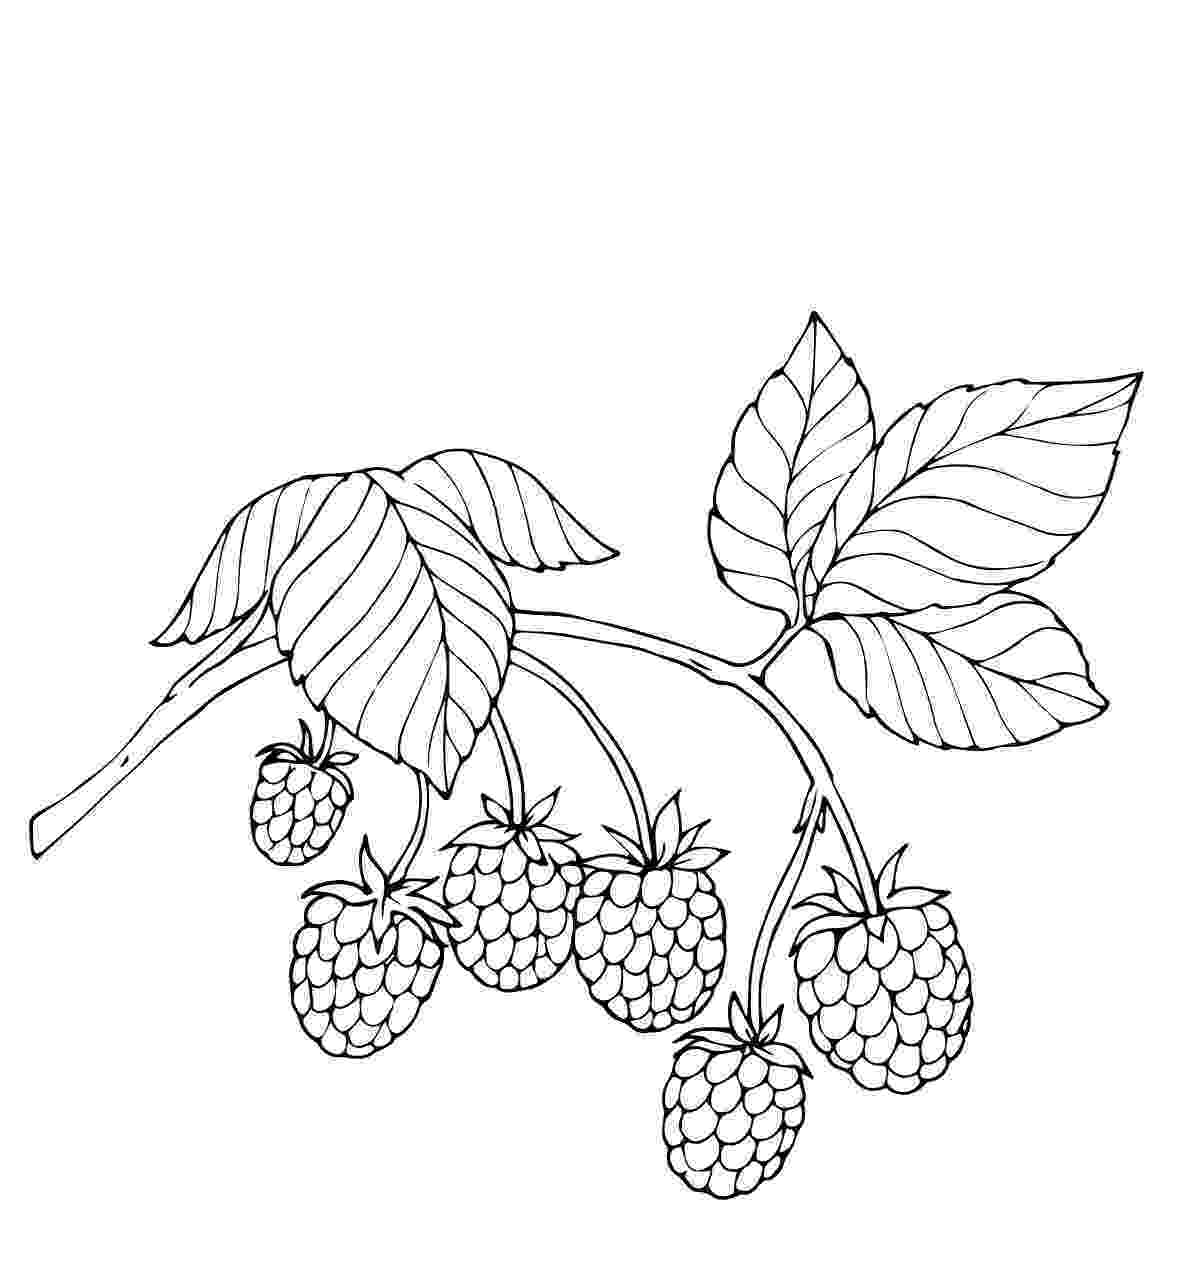 color page berries coloring pages to download and print for free color page 